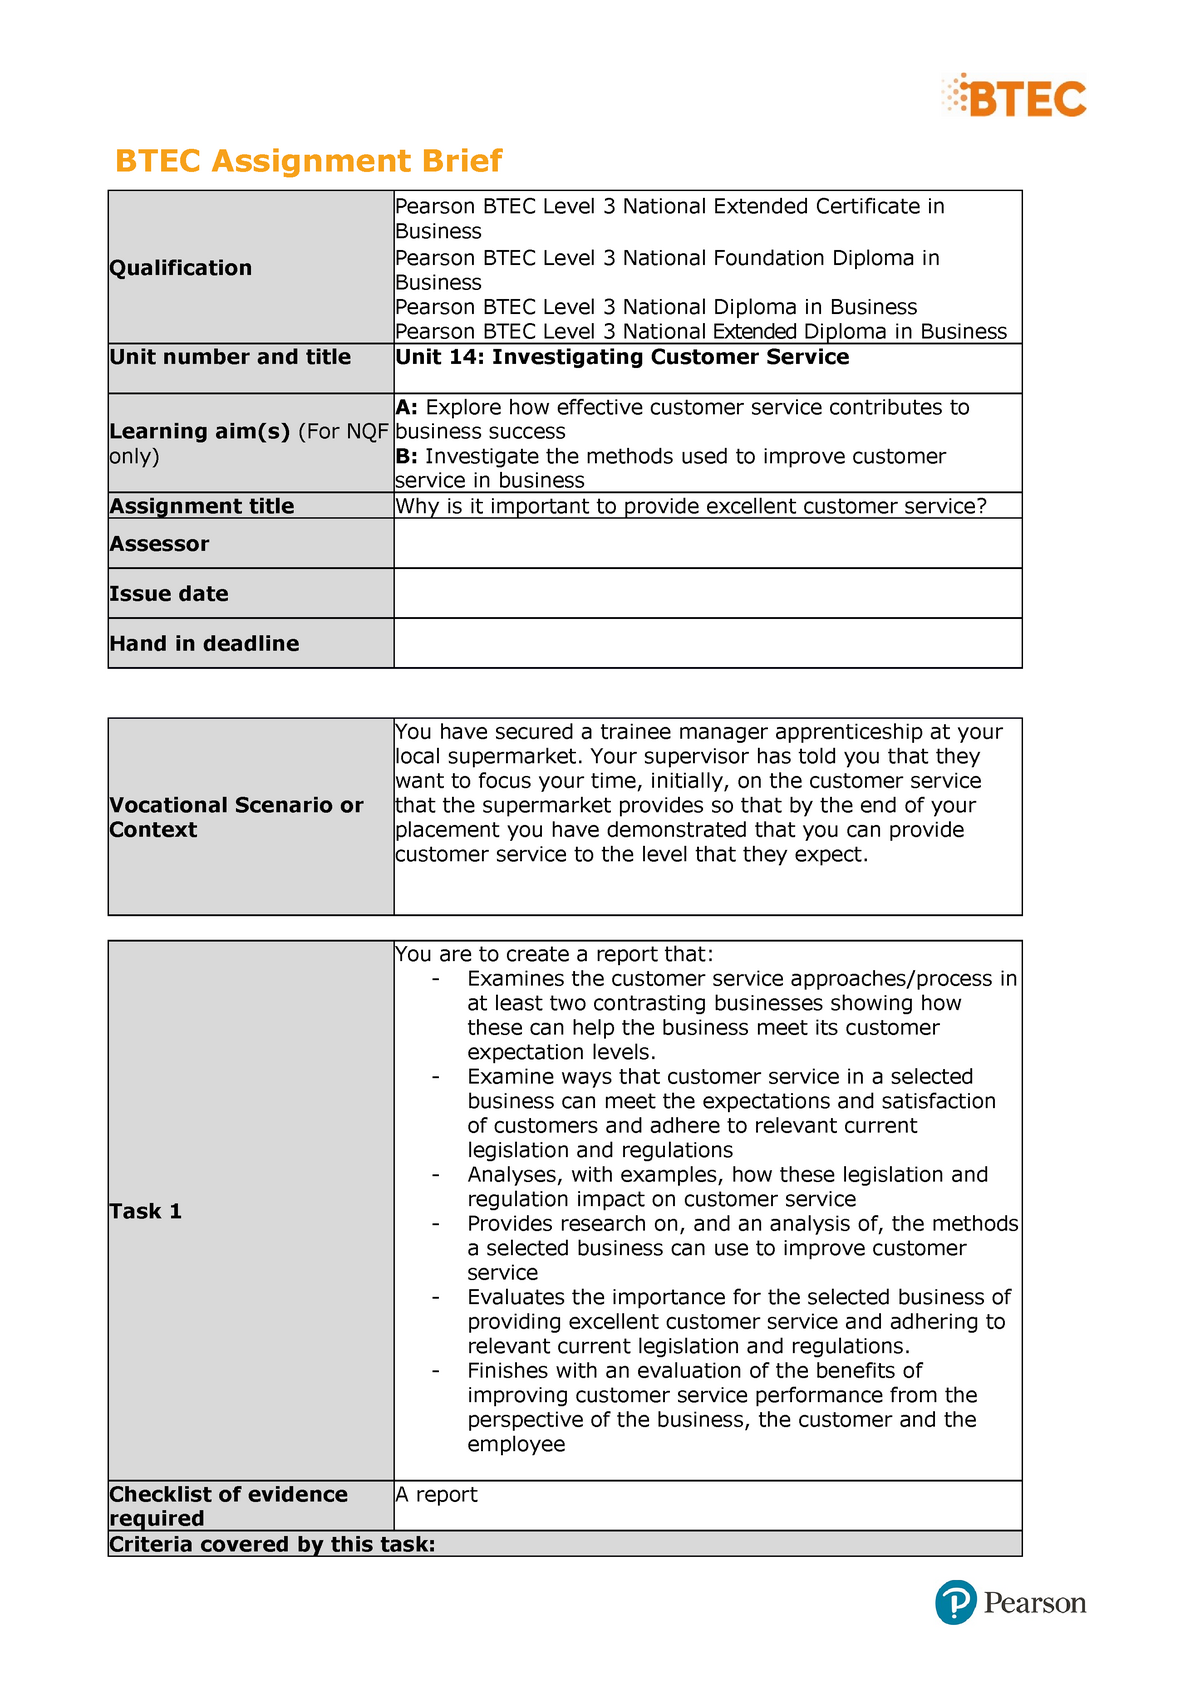 pearson iv assignment brief template